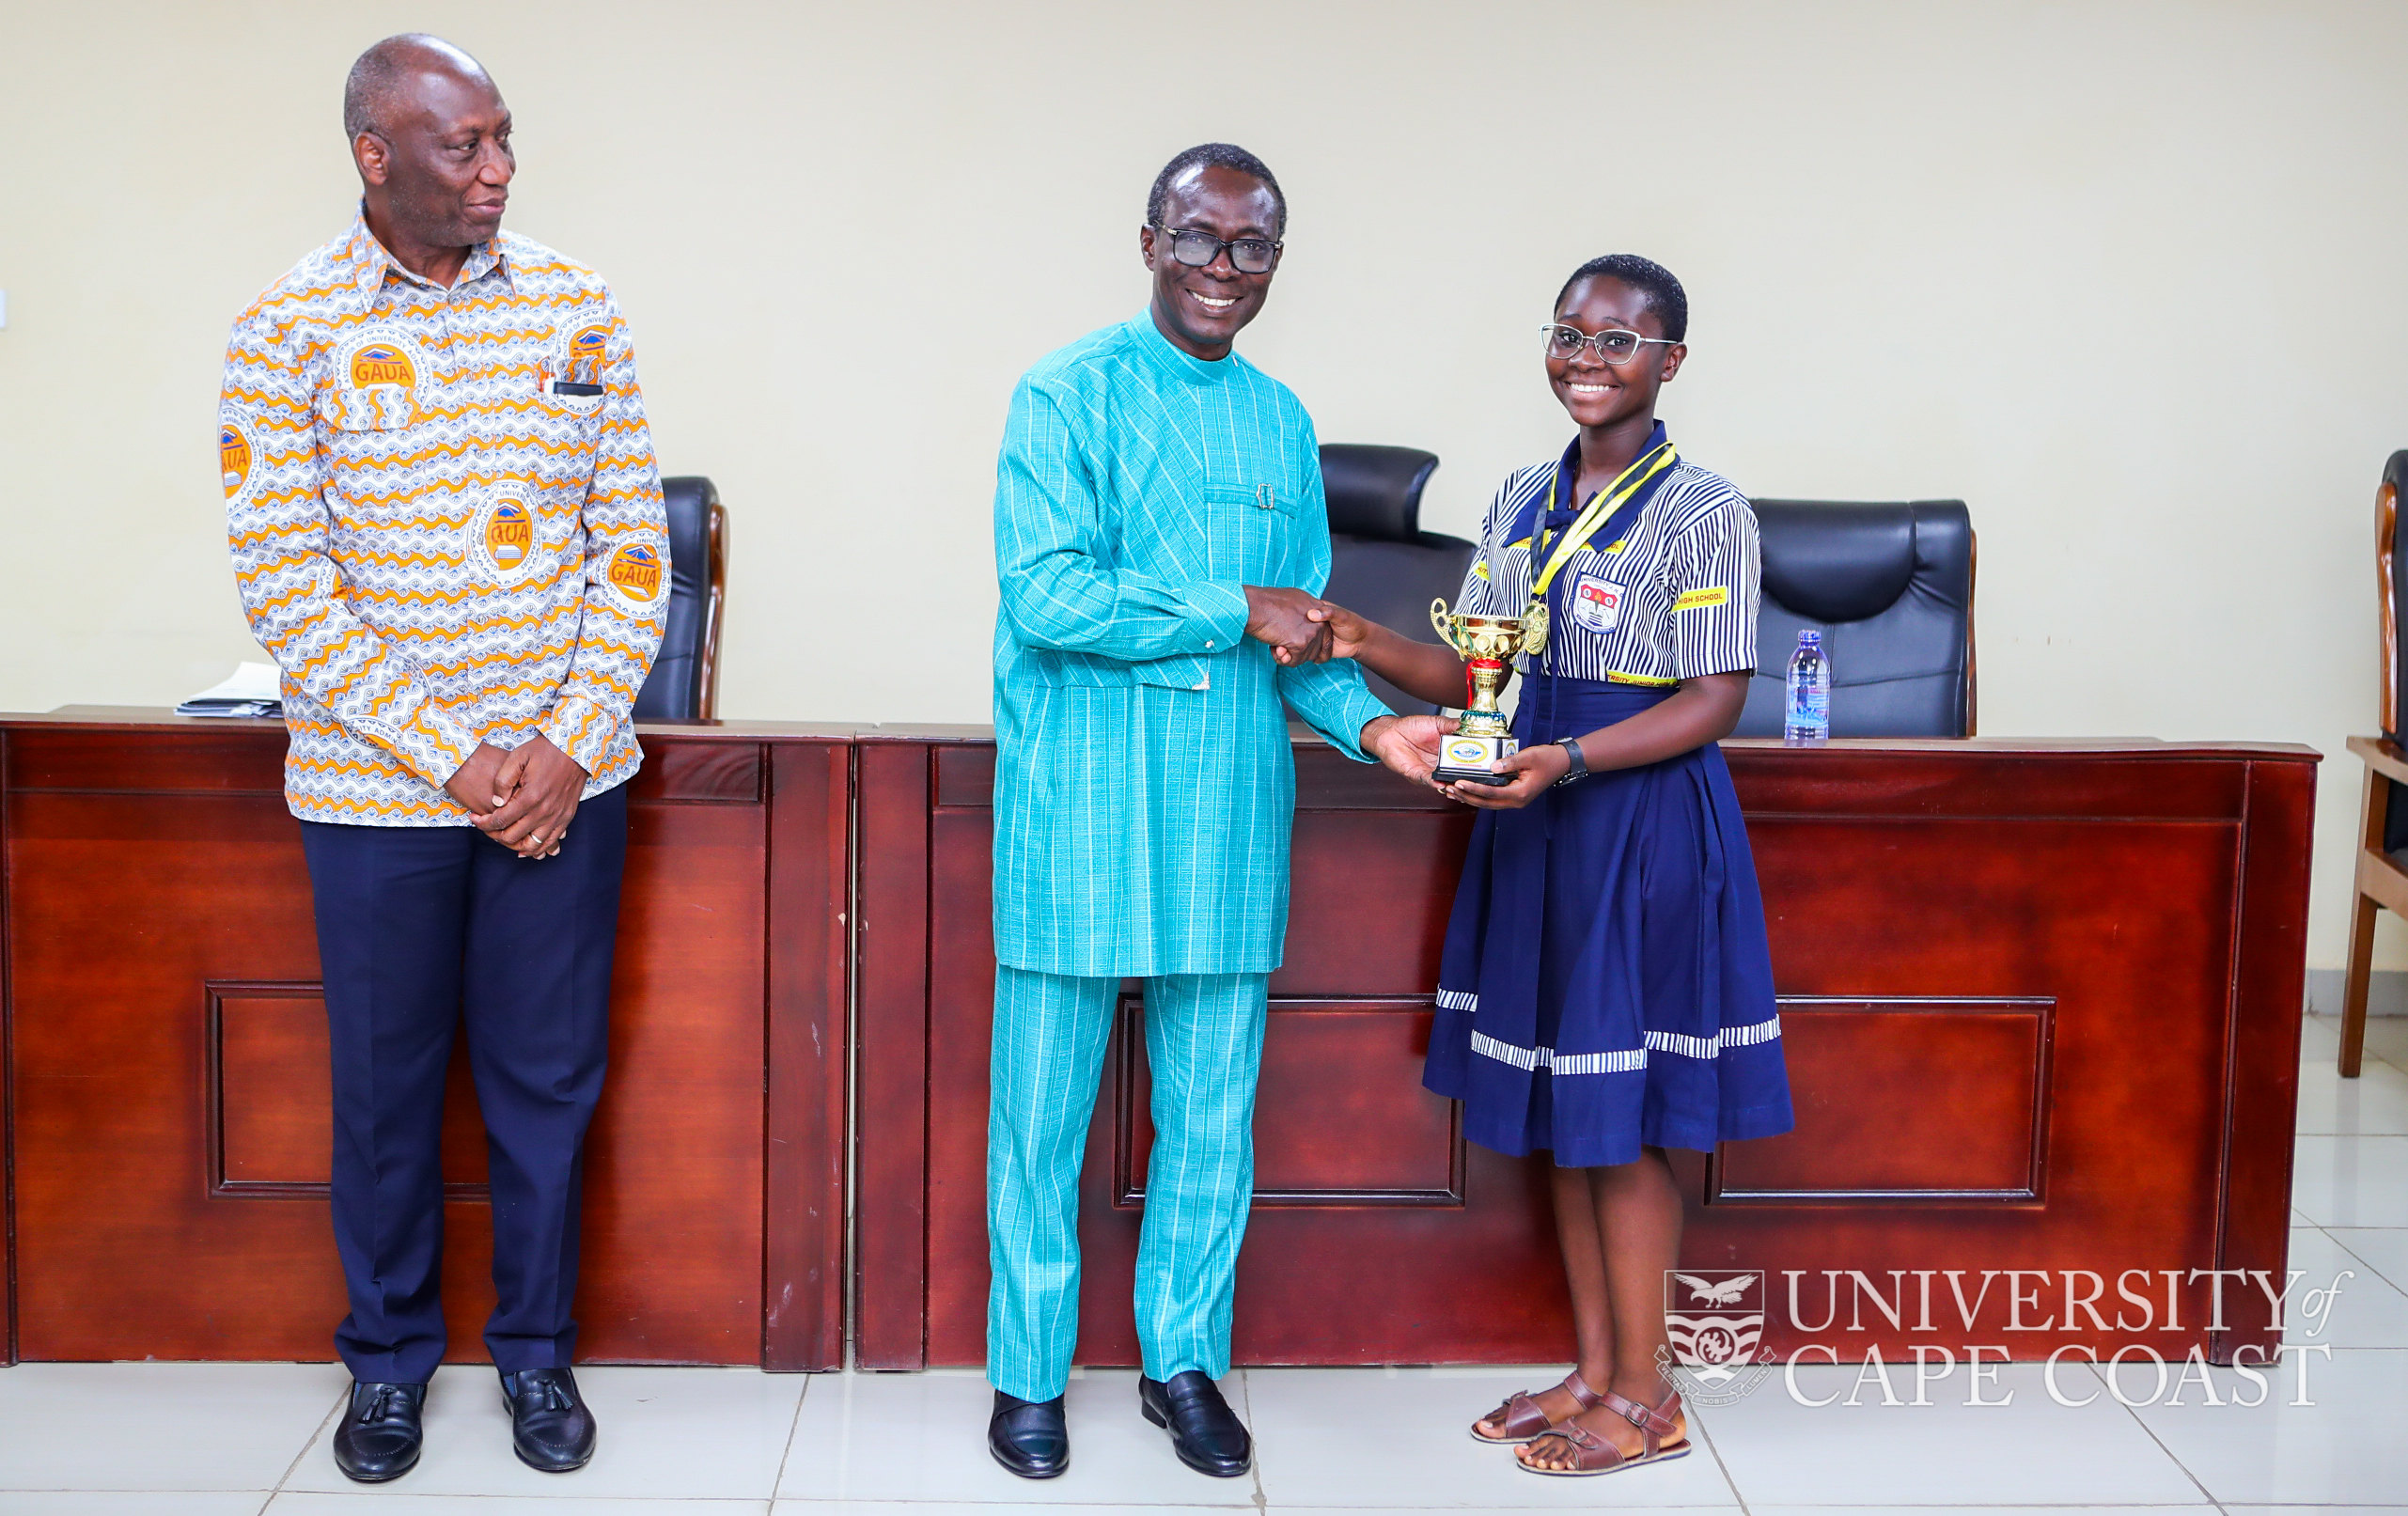 awardee presenting the trophy to the Vice-Chancellor